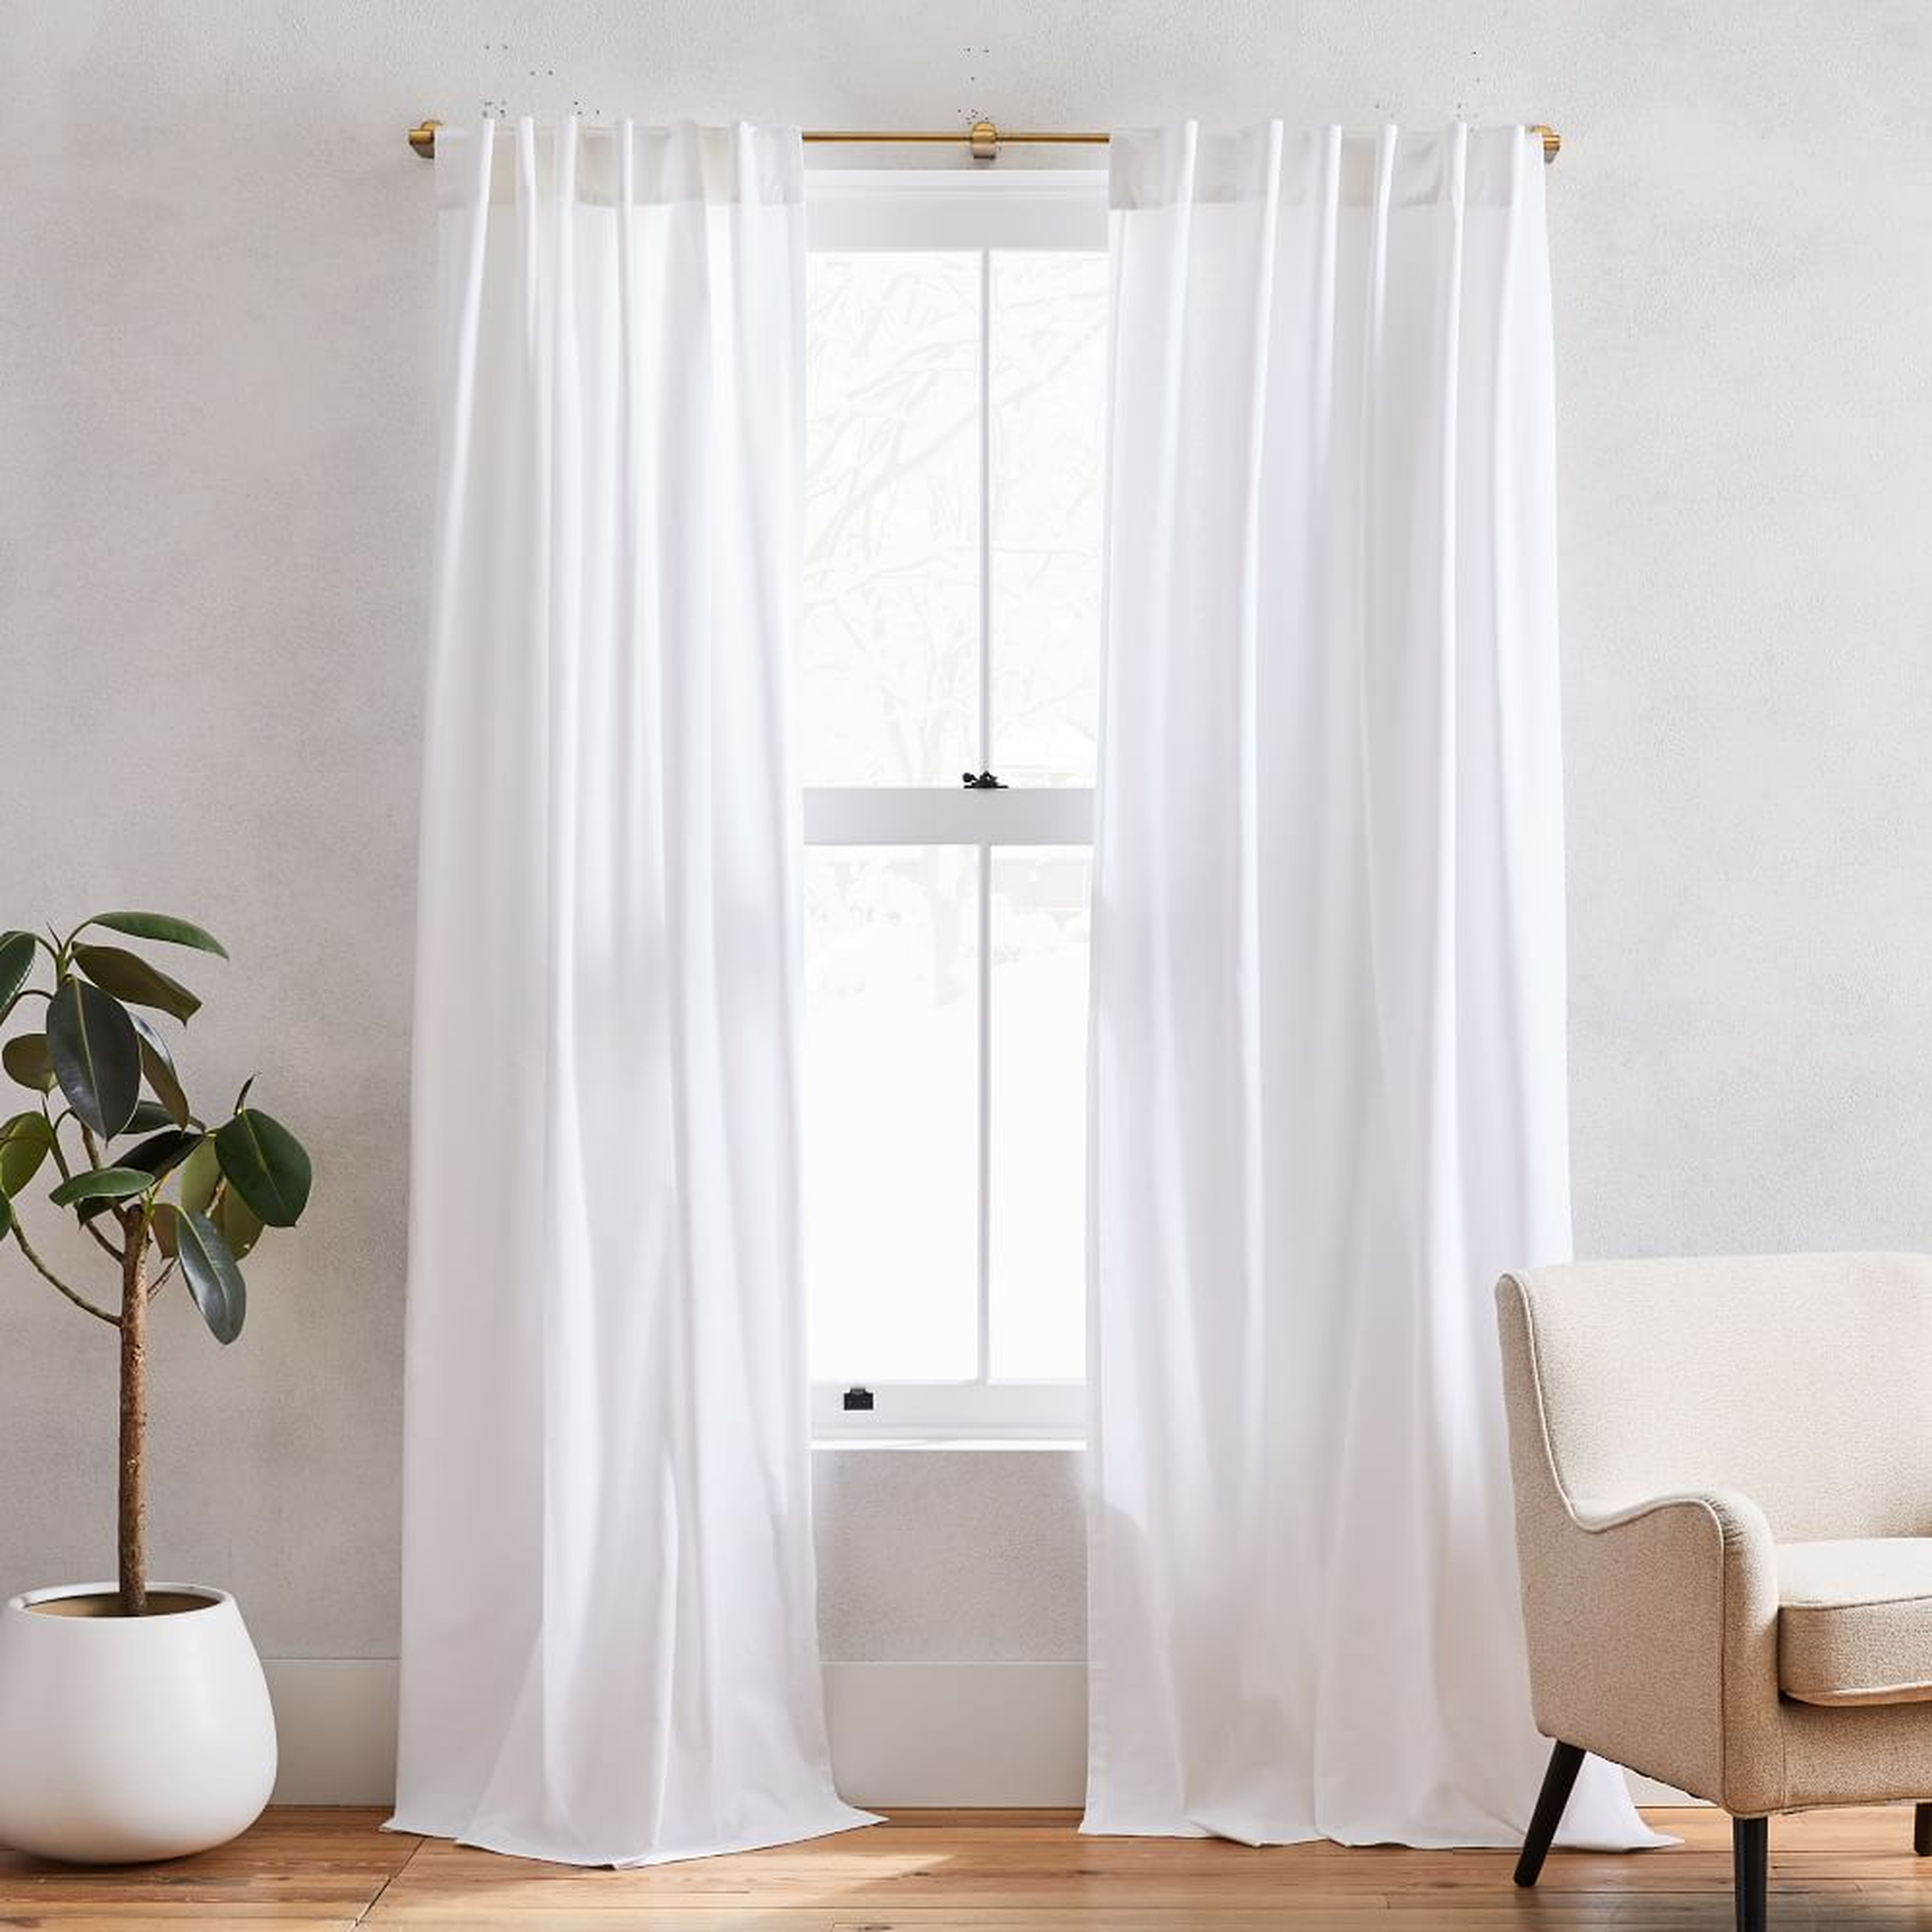 Cotton Canvas Curtain with Cotton Lining, White, 48"x96", Set of 2 - West Elm